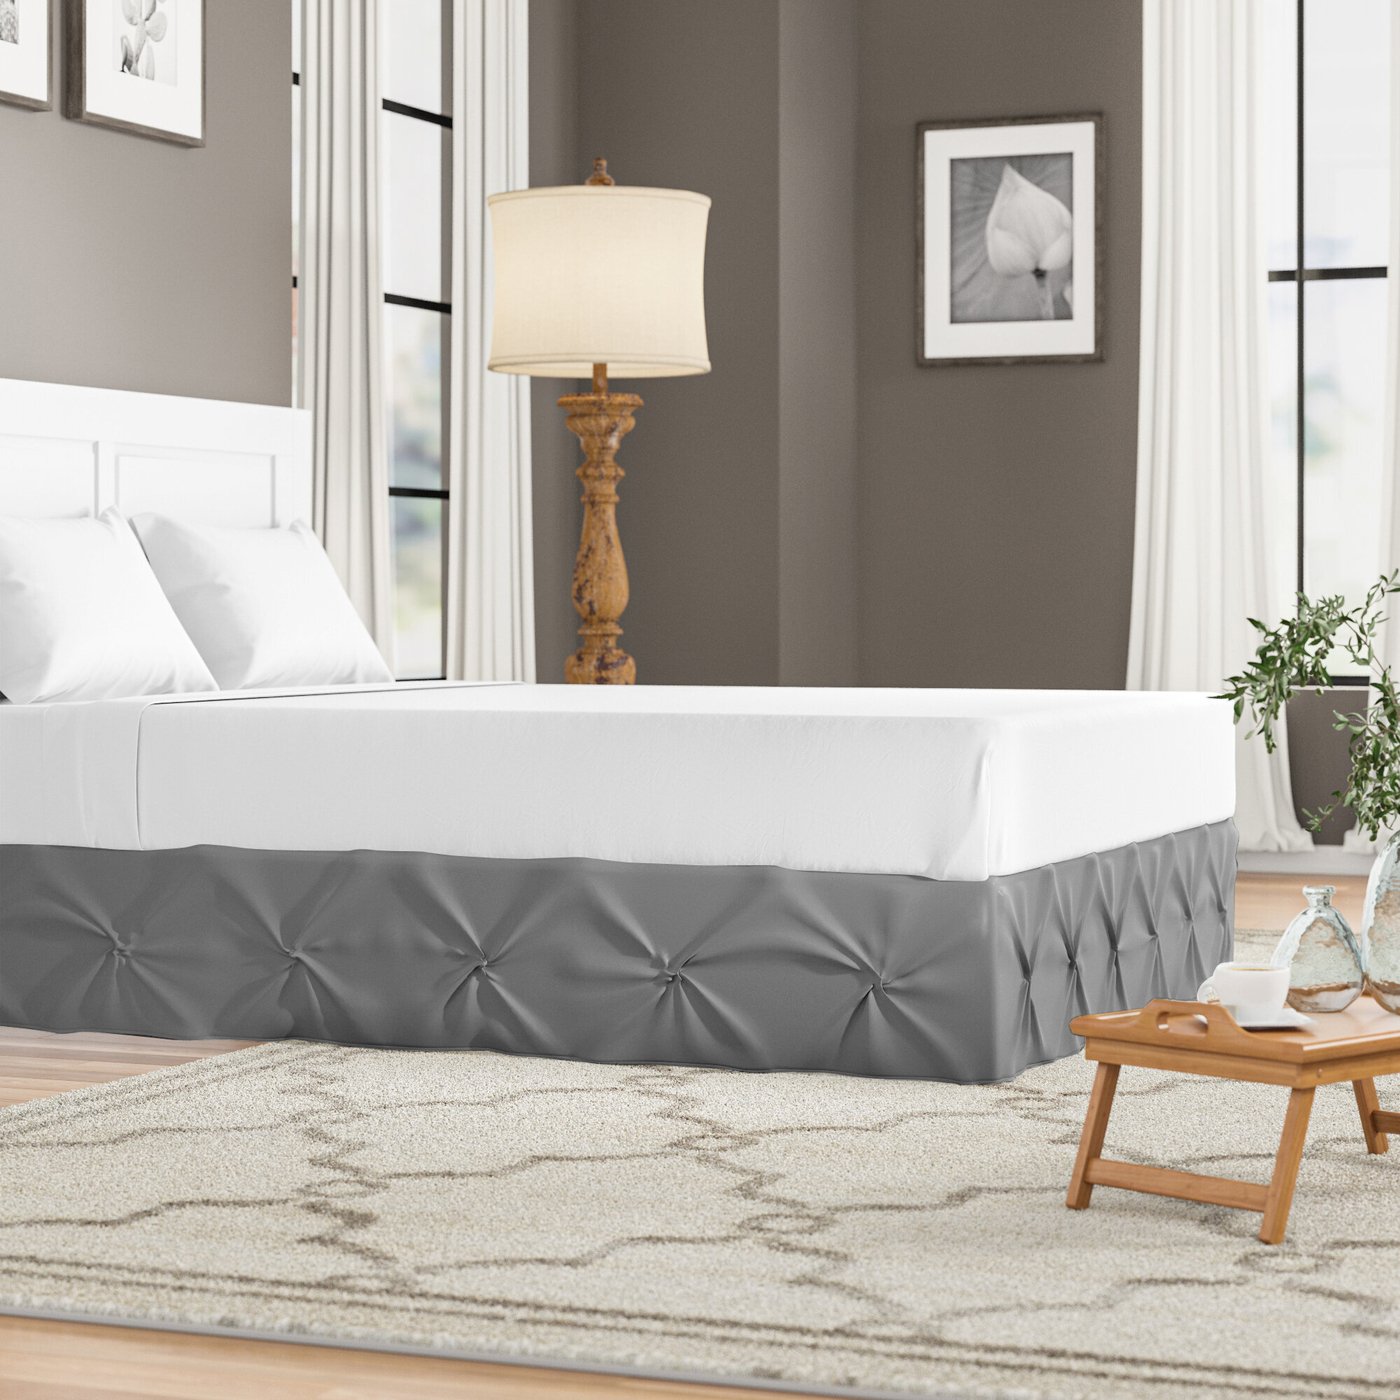 4 Expert Tips To Choose A Bed Skirt VisualHunt